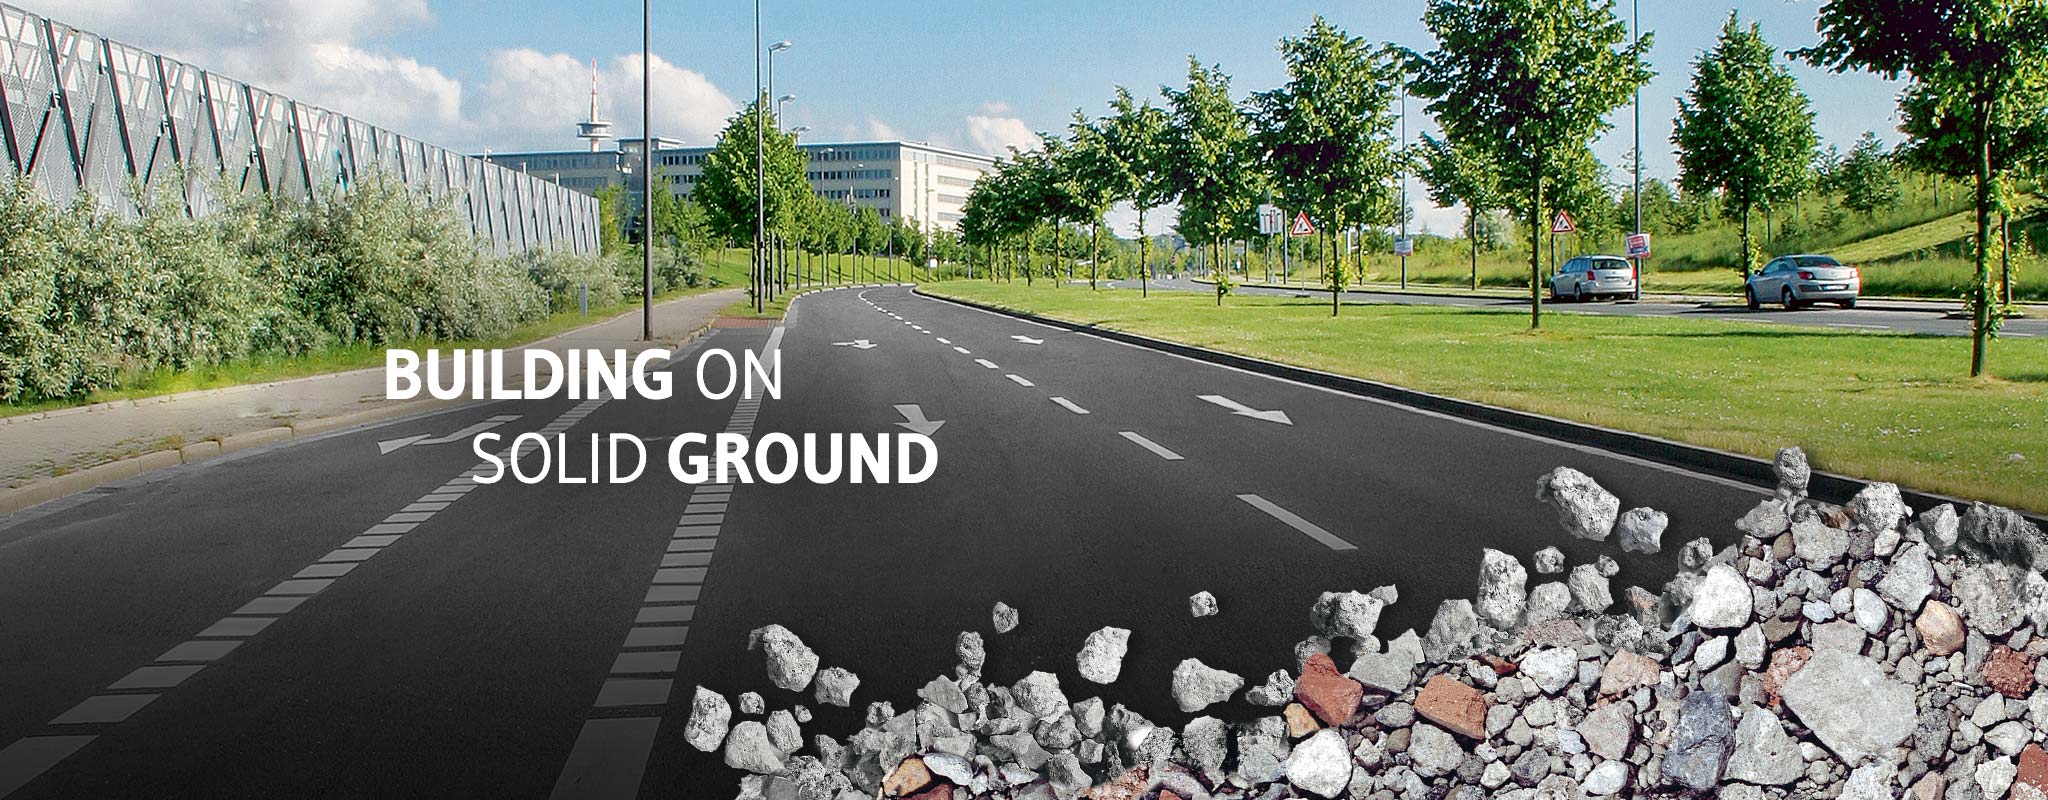 A solid base for roads: REMEXIT recycled aggregates produced by REMEX